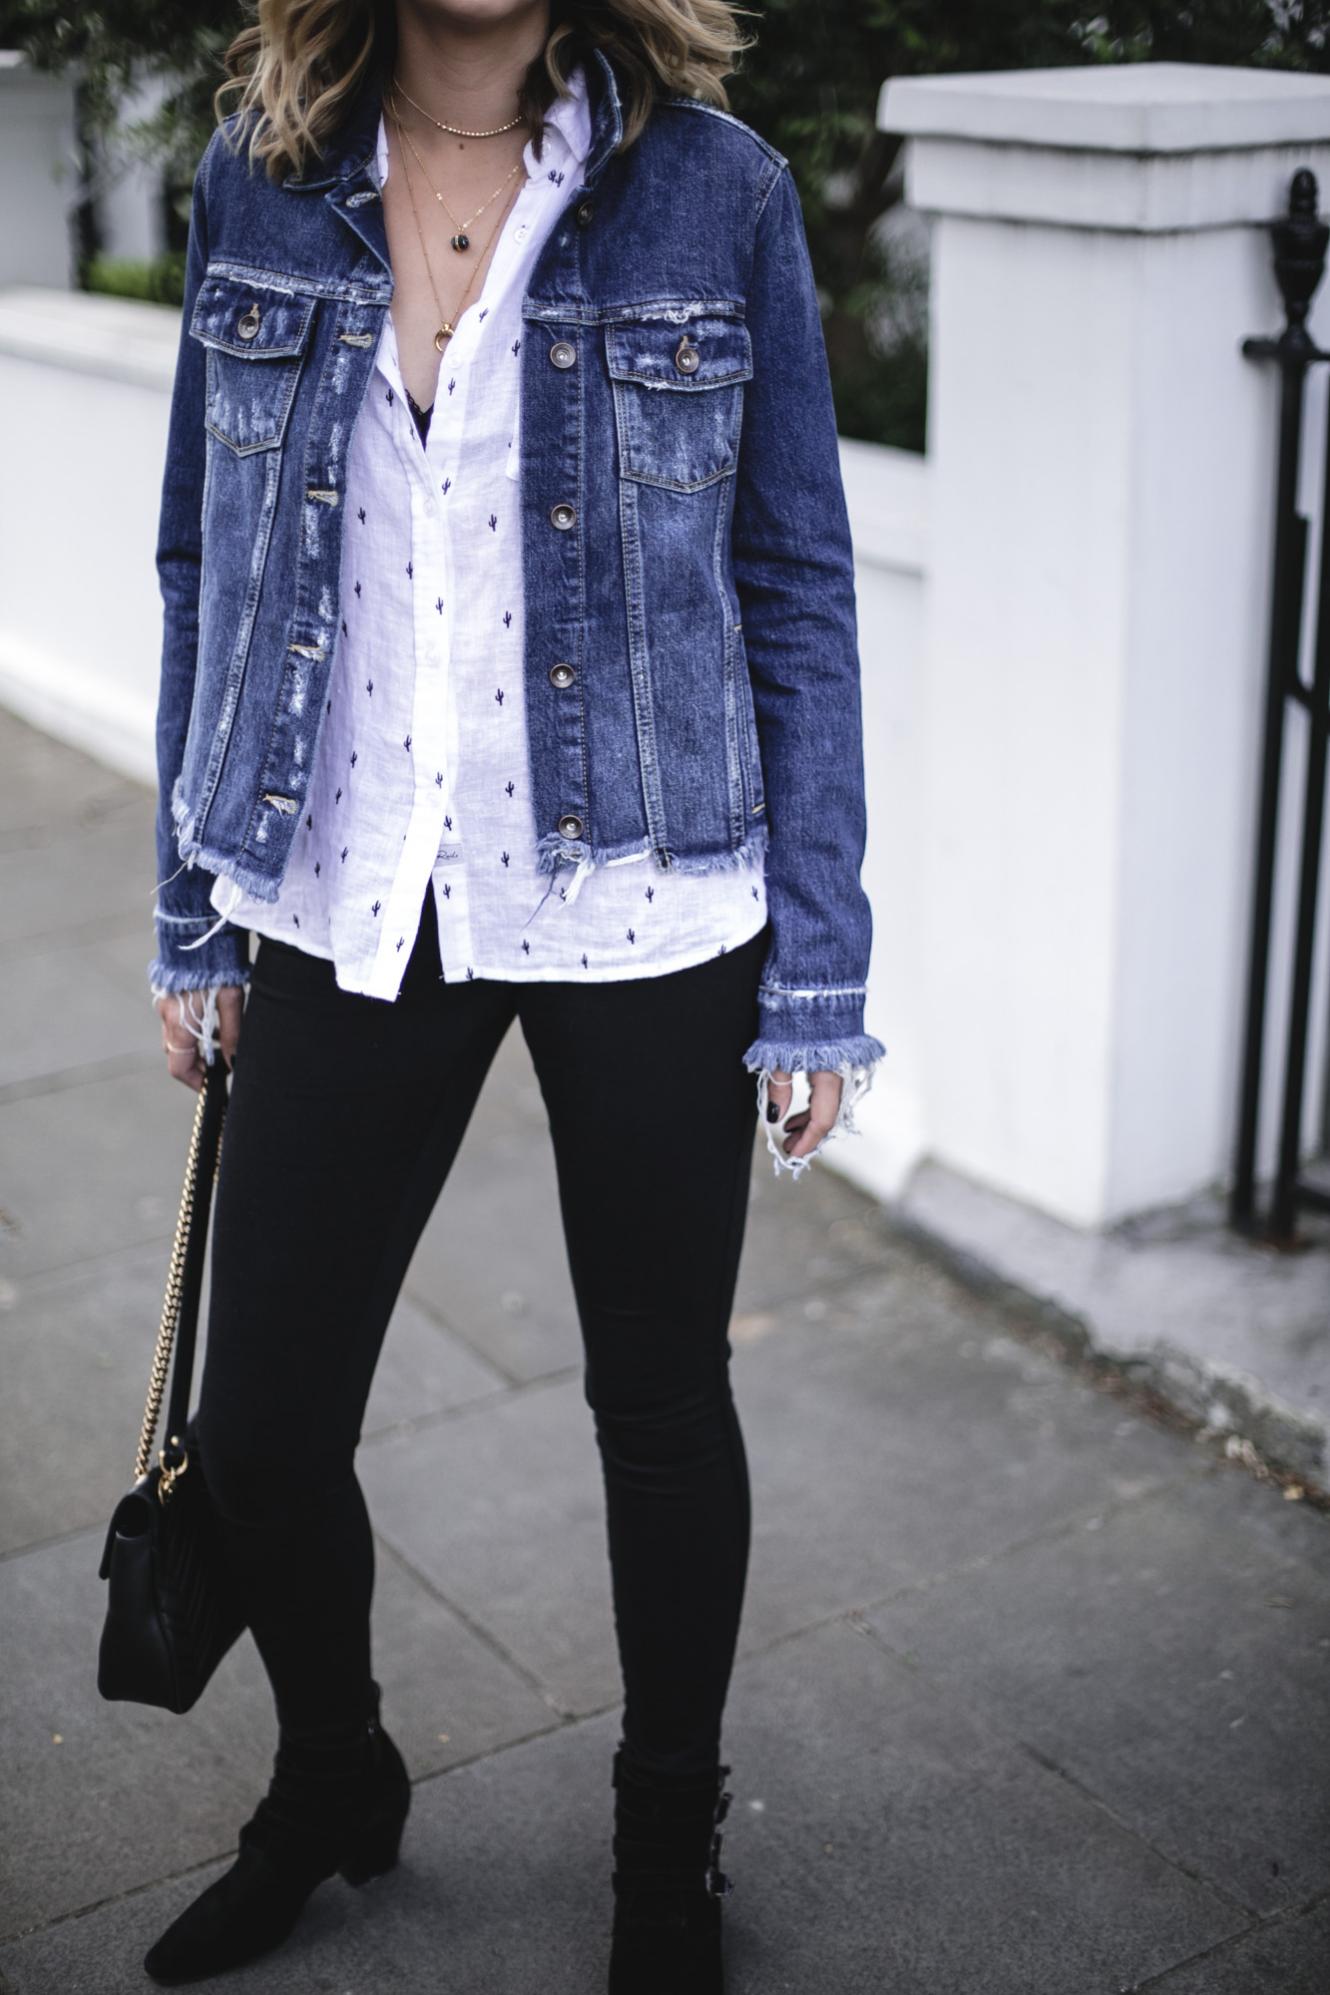 Emma Hill wears Paige frayed denim jacket, Rails white linen cactus print shirt, black skinny jeans, Gucci marmont bag, black buckle ankle boots, casual Spring outfit